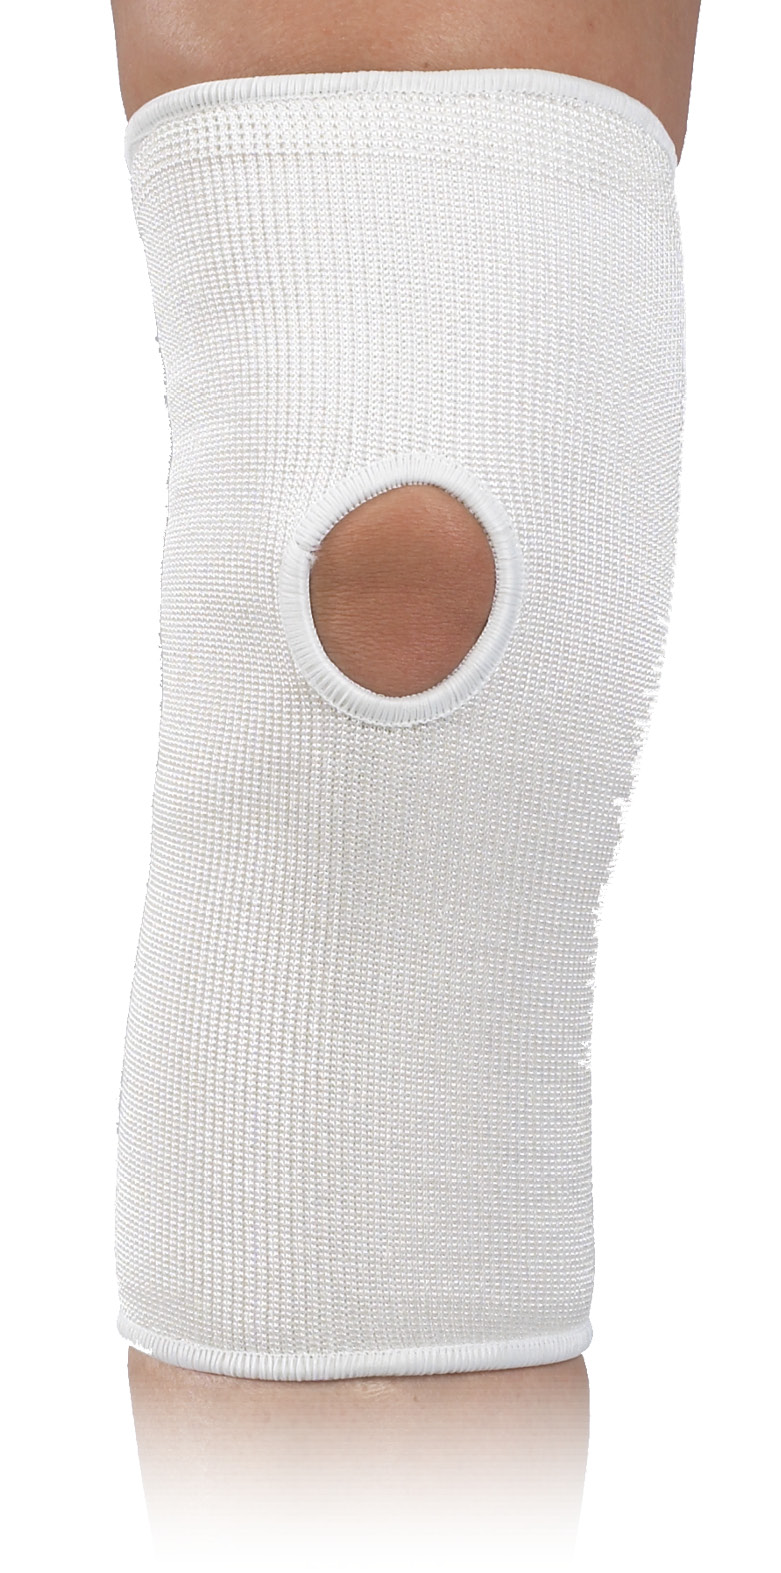 10-20060-xl-4 11 In. Slipon Knee Support Open Patella, Extra Large